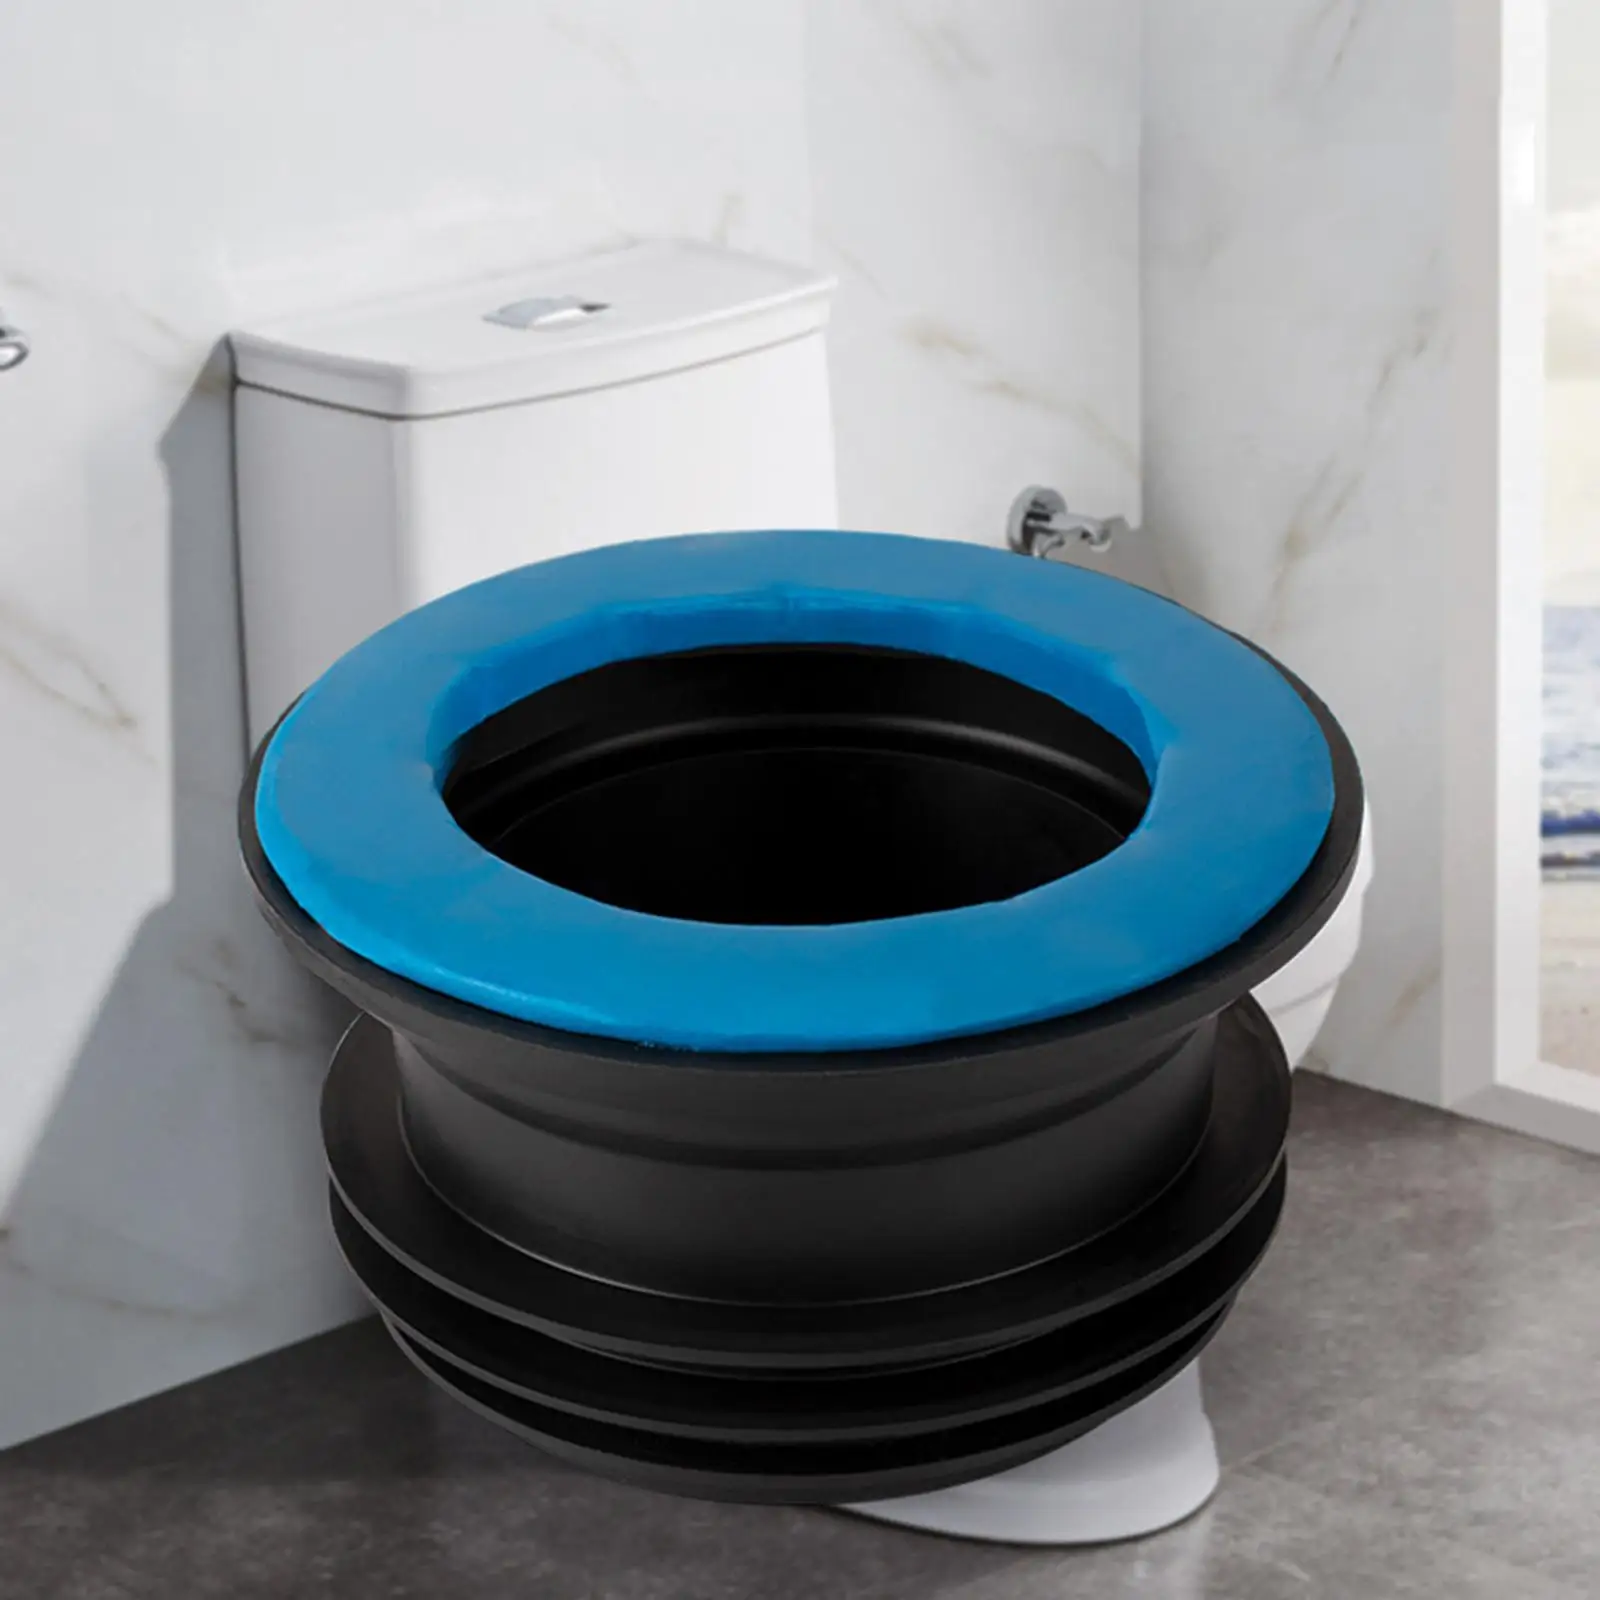 Universal Toilet Rubber Ring Seal Sealing Ring Bathroom Fitting Accessories